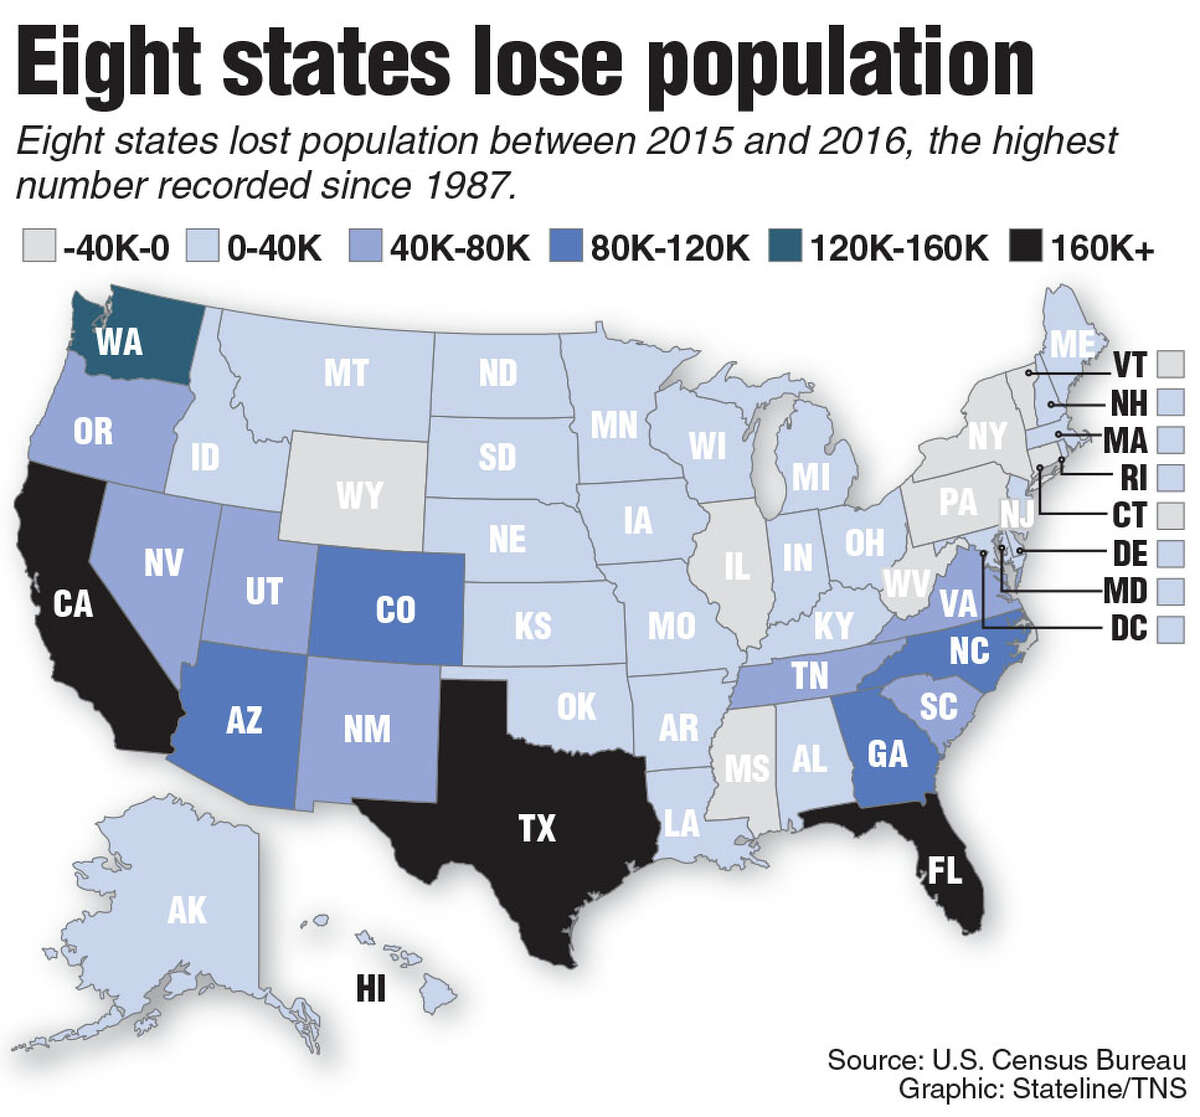 US experiences slowest population growth in 70 years, demographer says